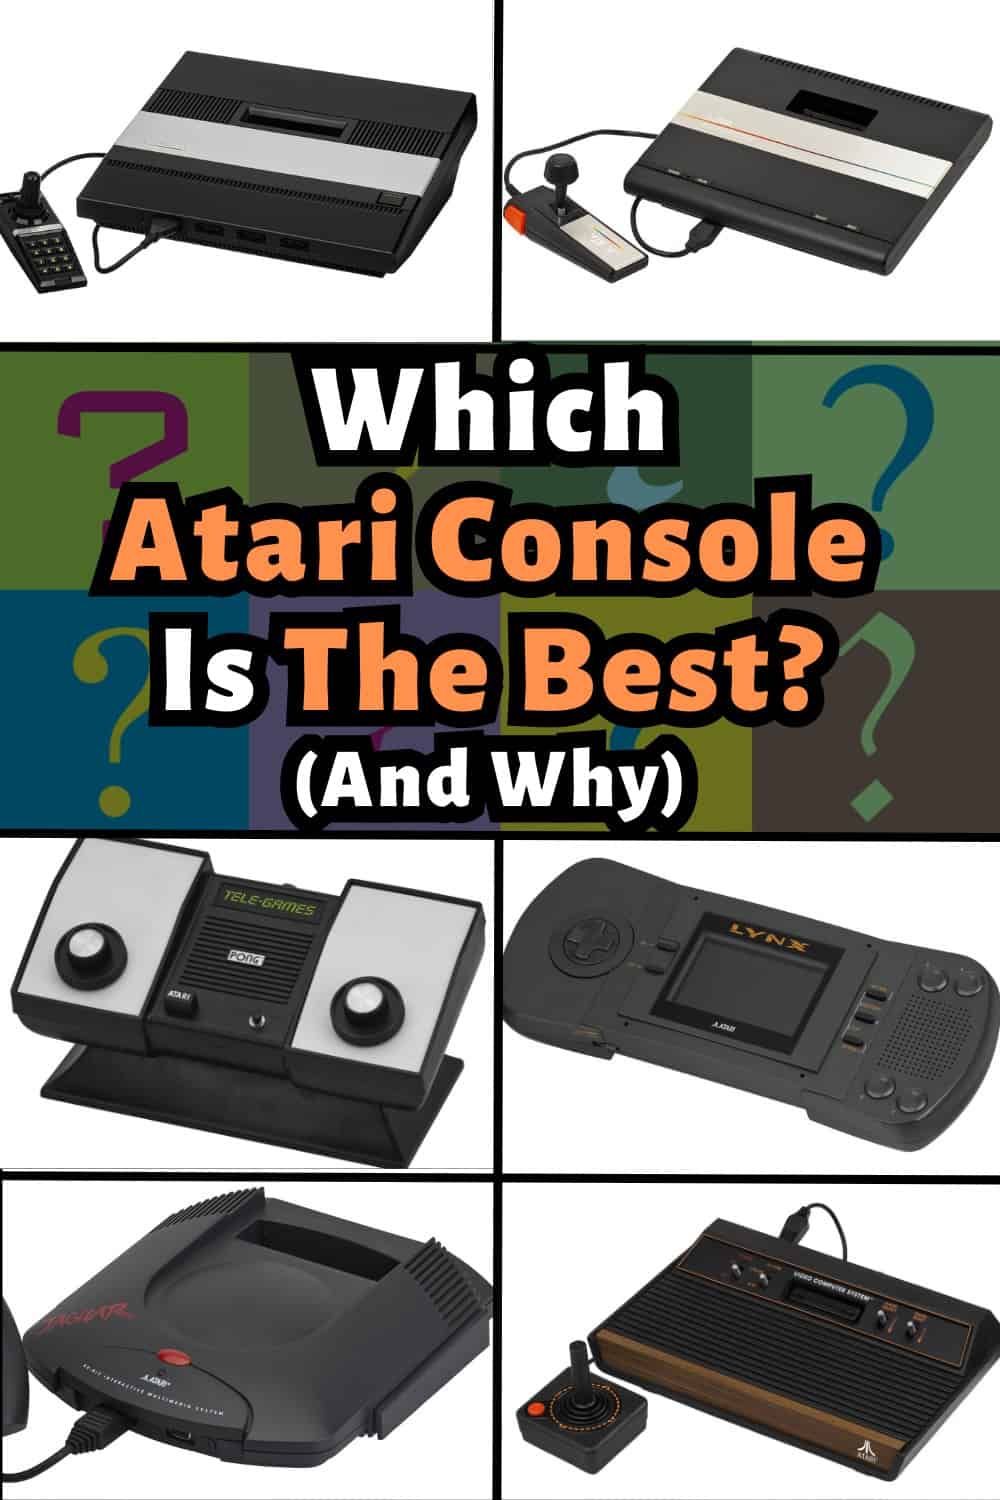 The Atari 2600 is the best Atari console made